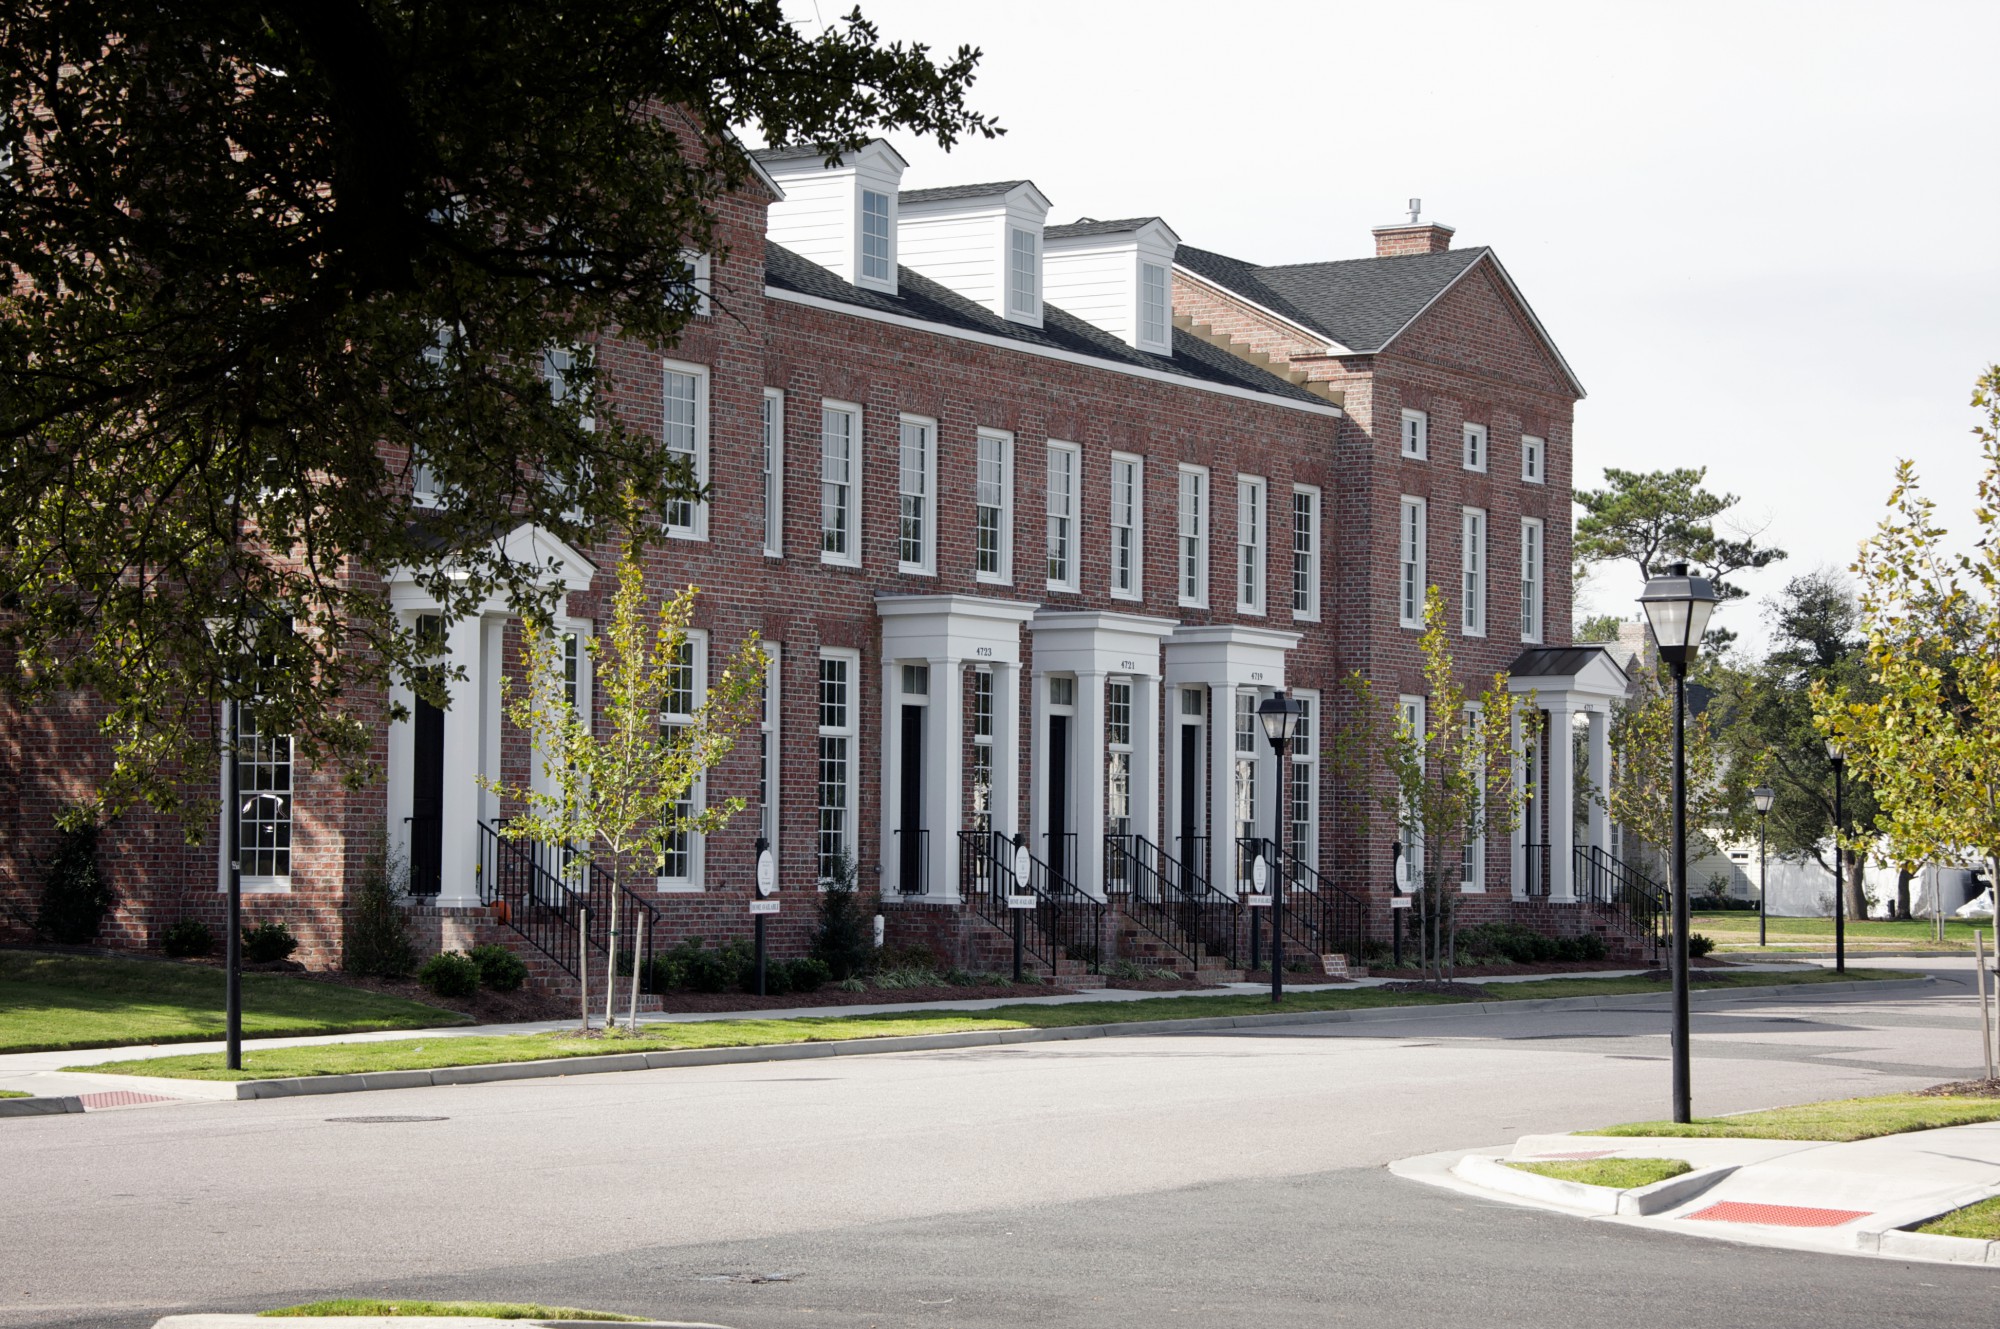 Townhomes colonial revivalbrick